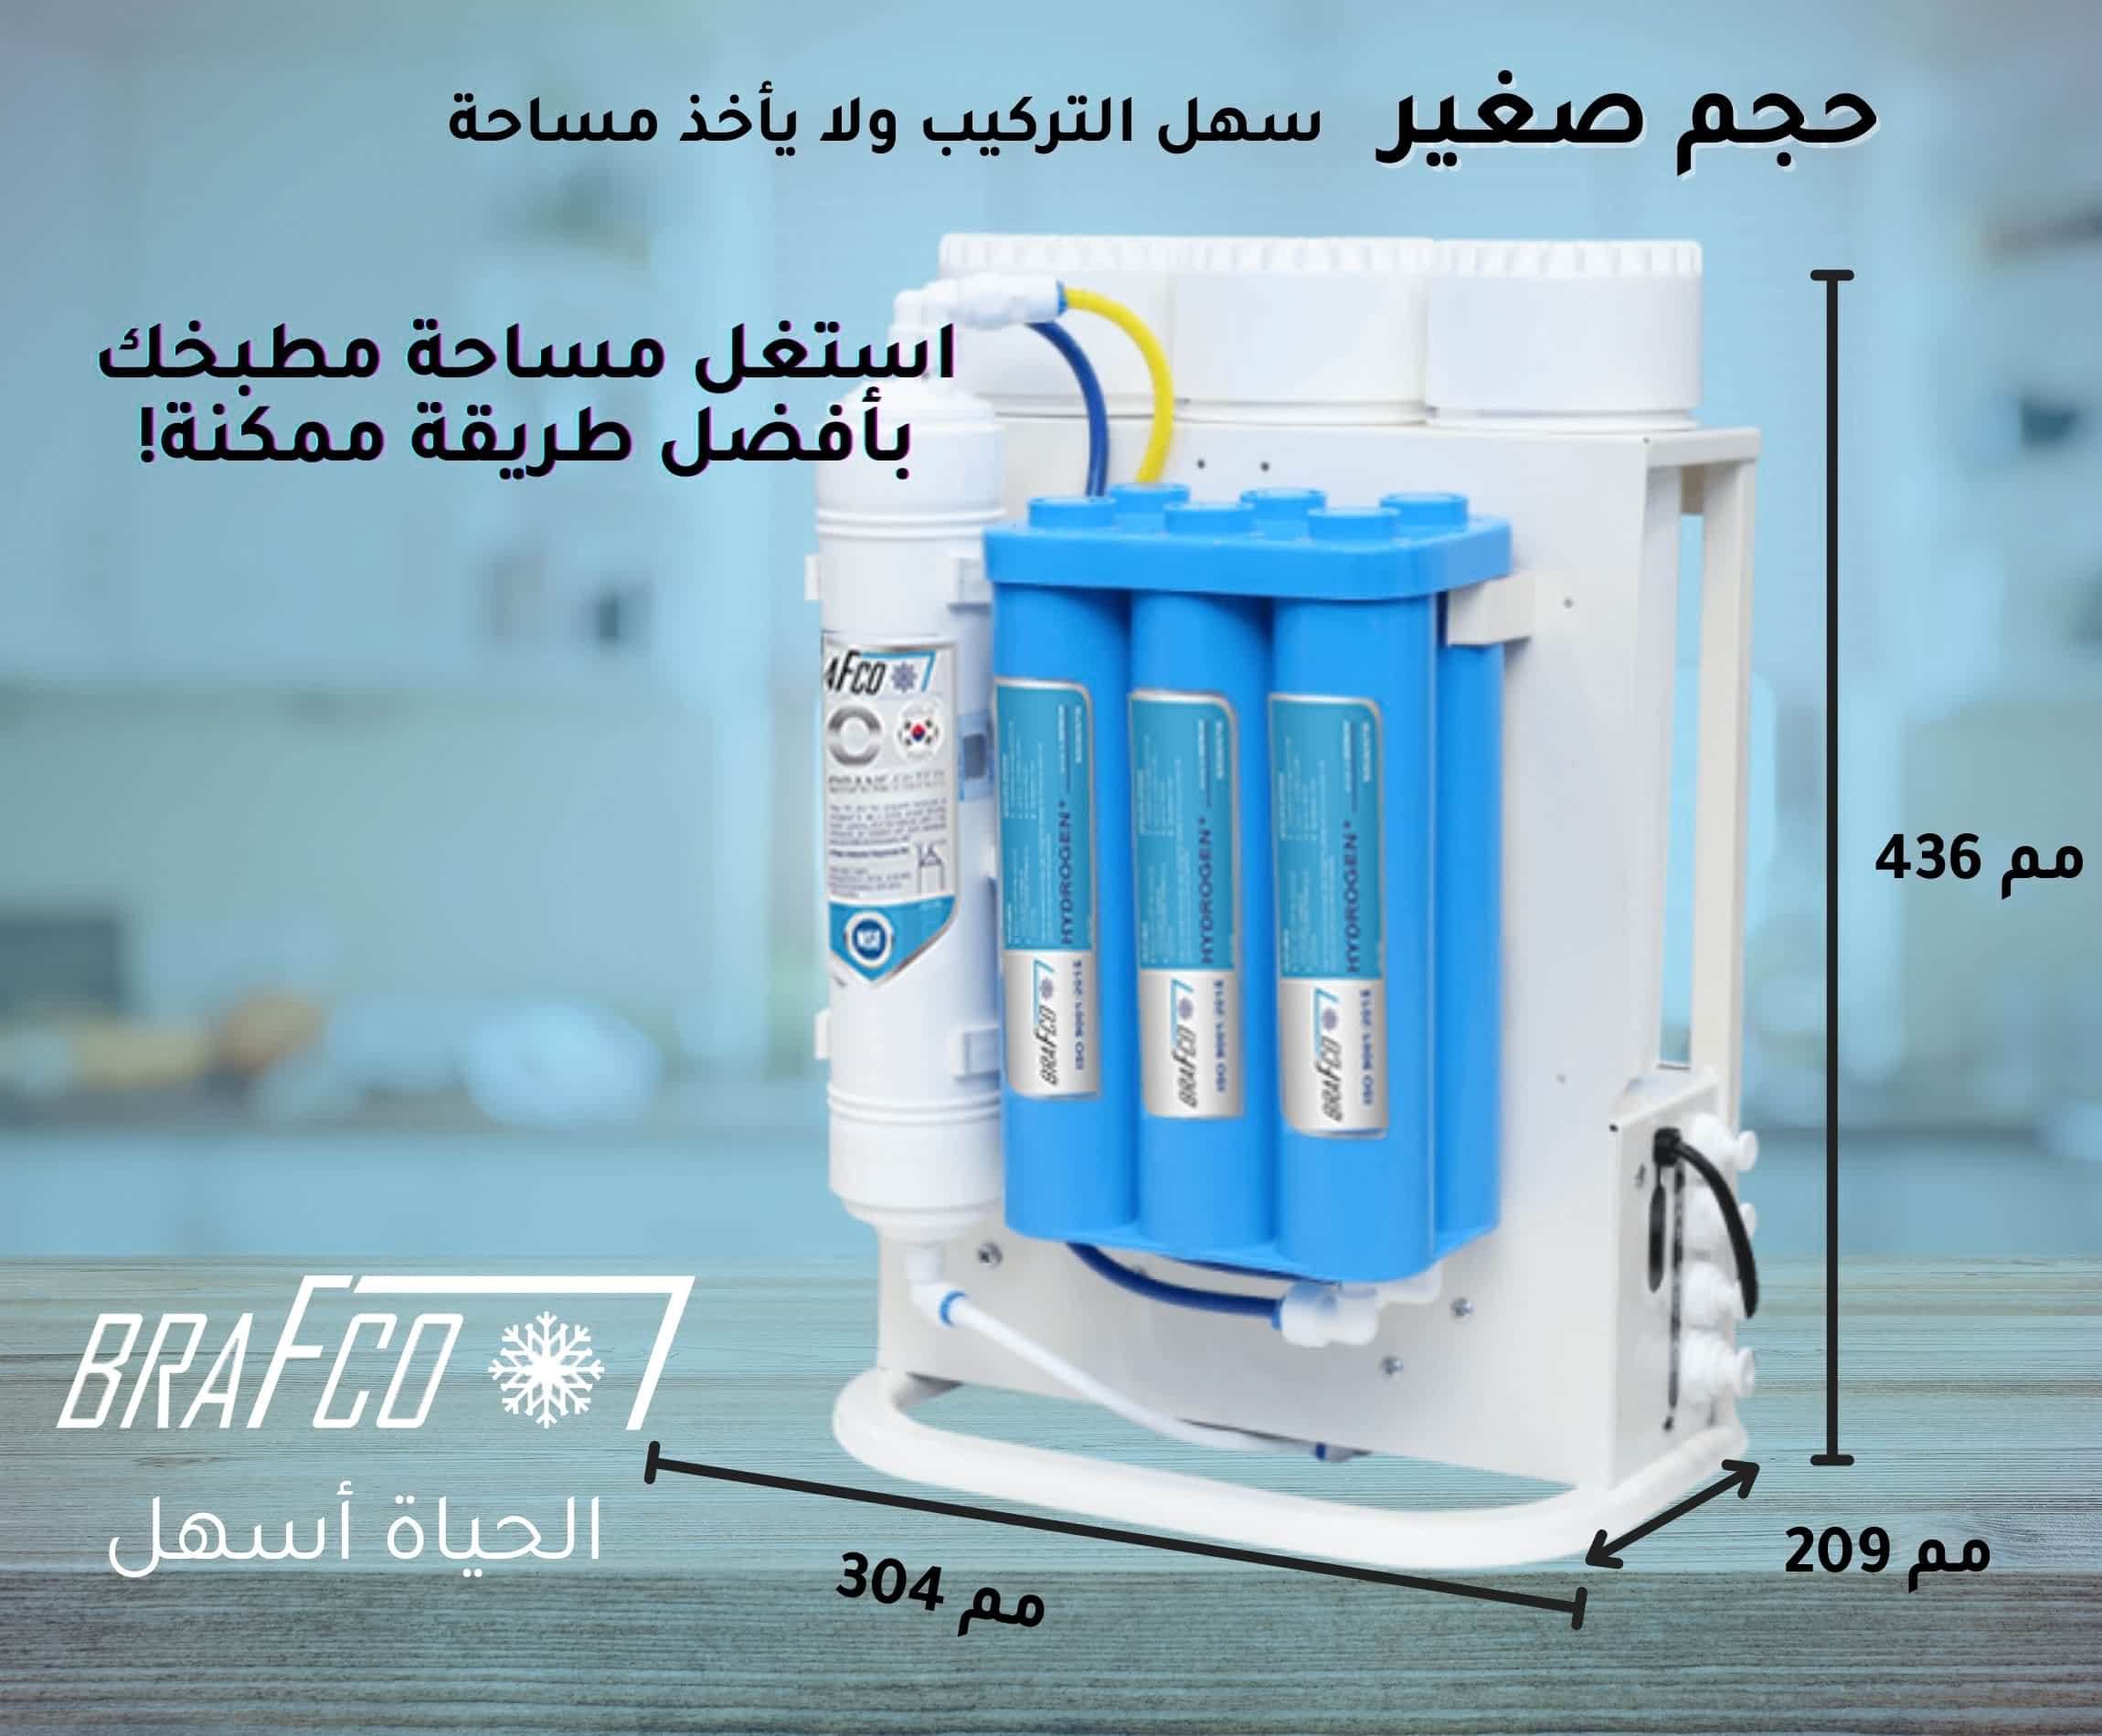 BRAFCO Water filter stage ( 1, 2, 3 ) - BRAFCO for the best water